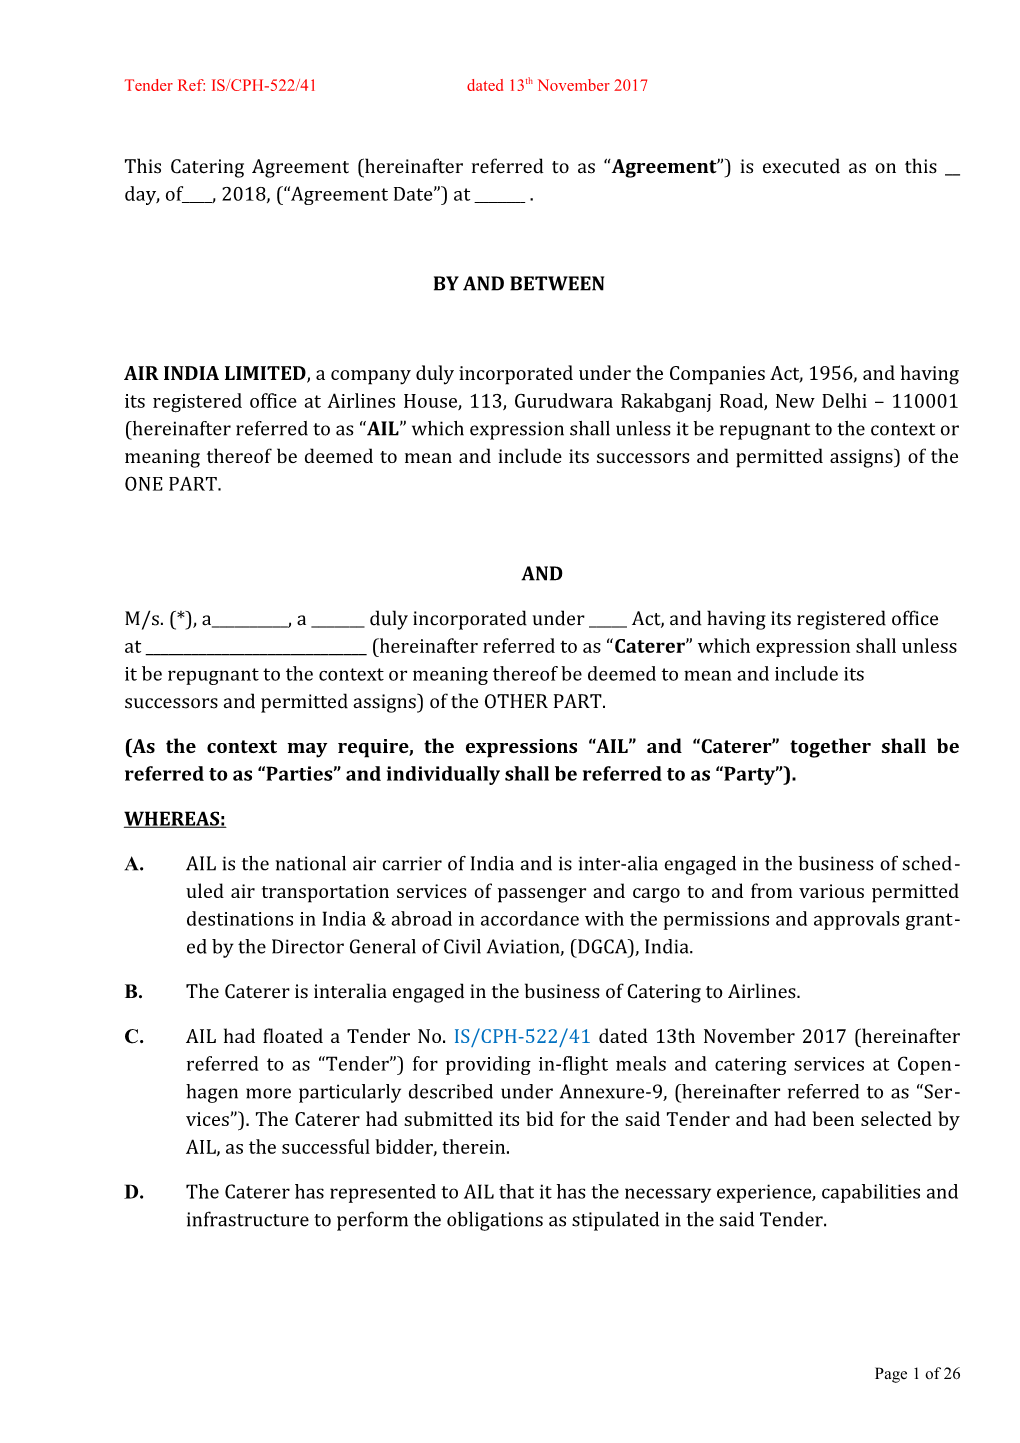 This Catering Agreement (Hereinafter Referred to As Agreement ) Is Executed As on This